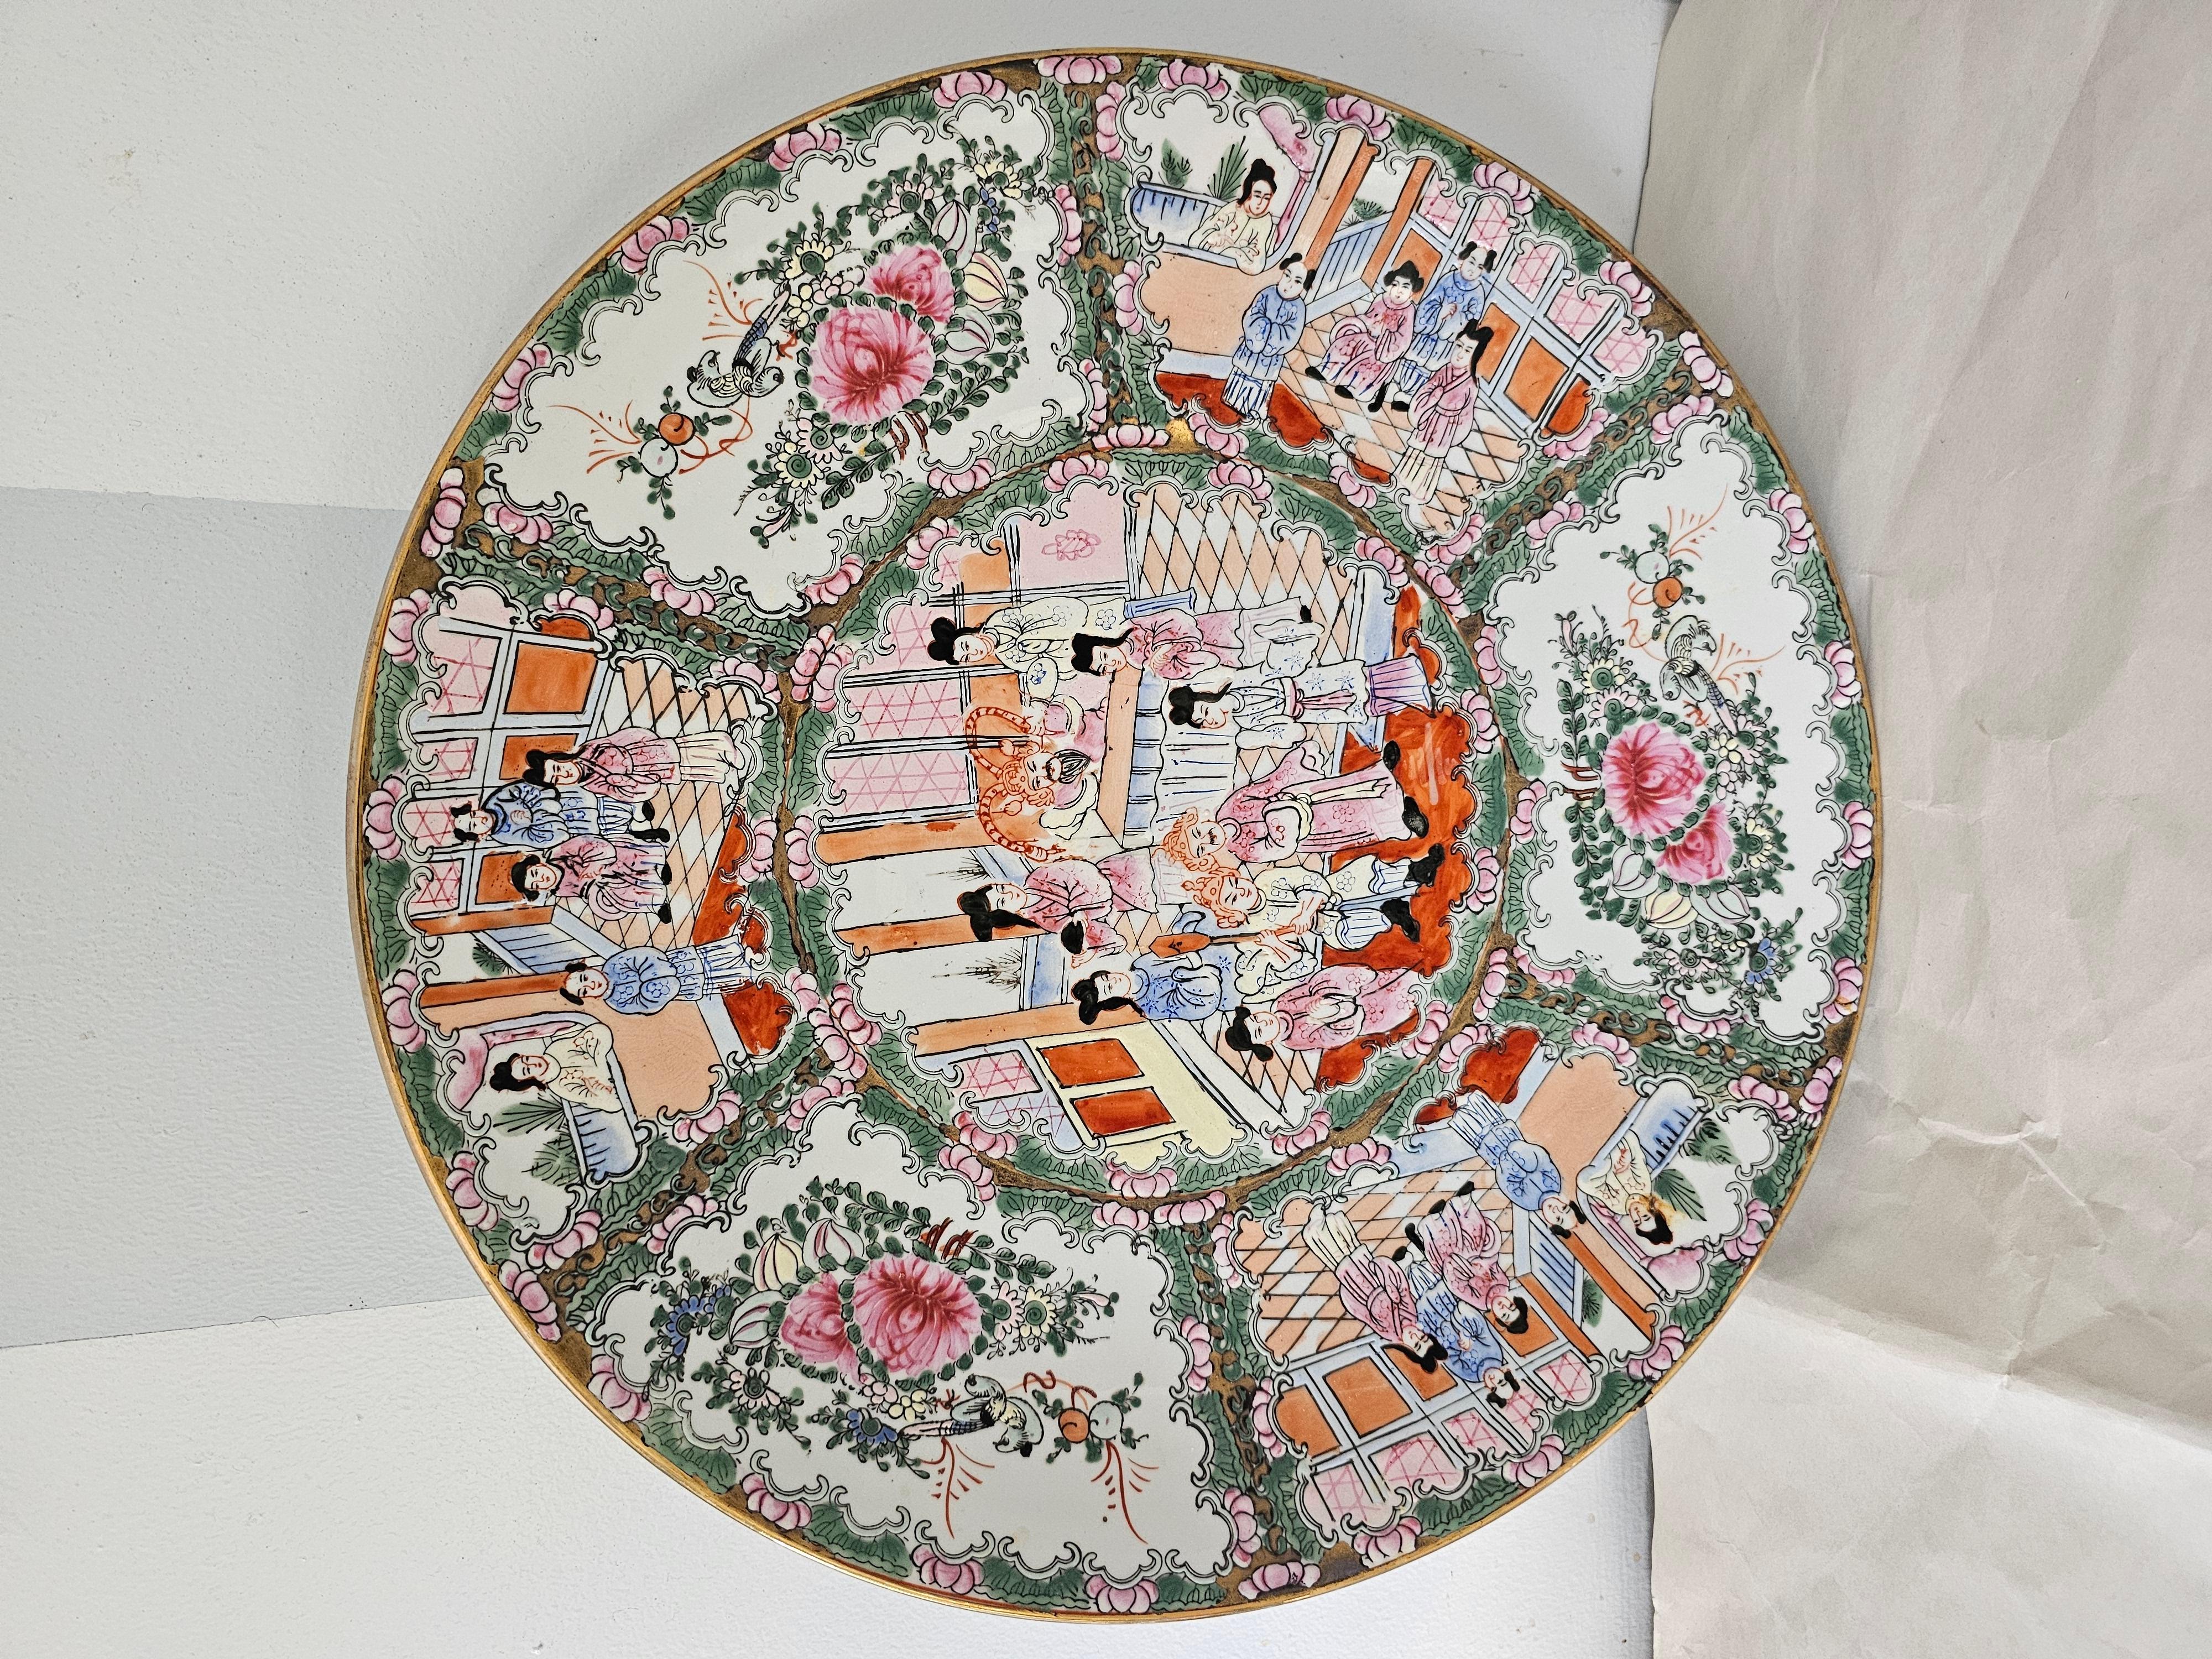 A 19th Century Large Chinese Rose Medallion Decorative Platter in great antique construction . Measures 16